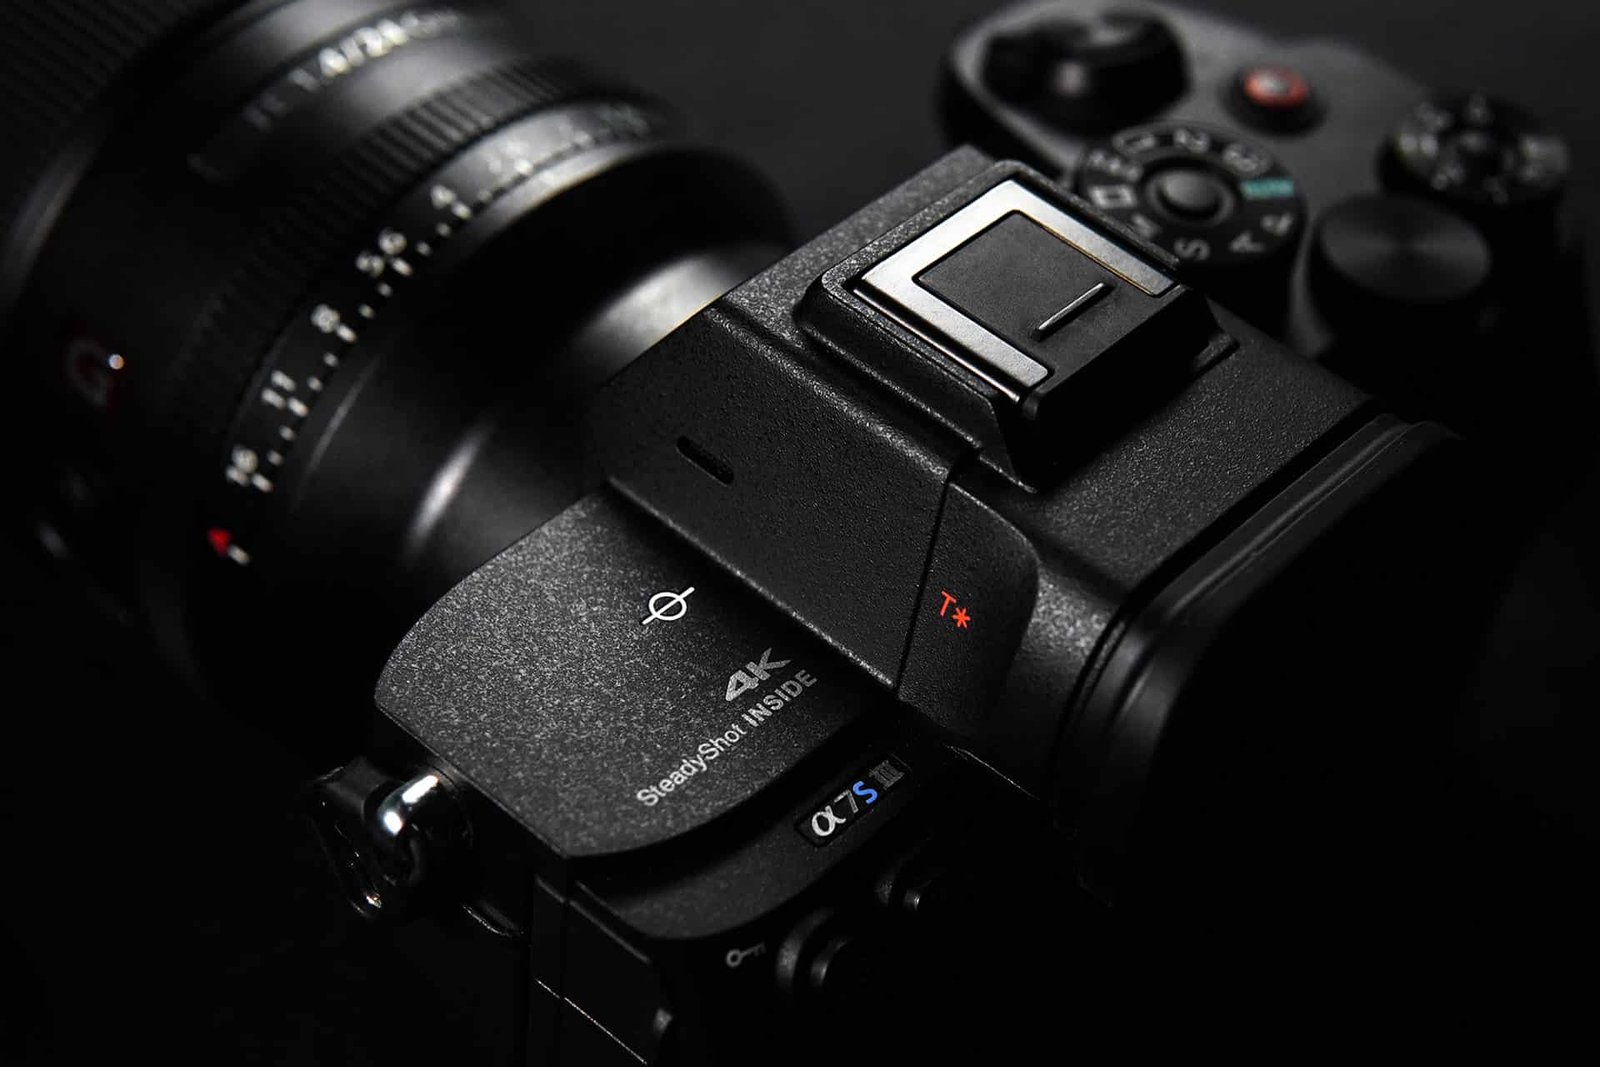 Buying a mirrorless camera: Pros and cons of new vs. used